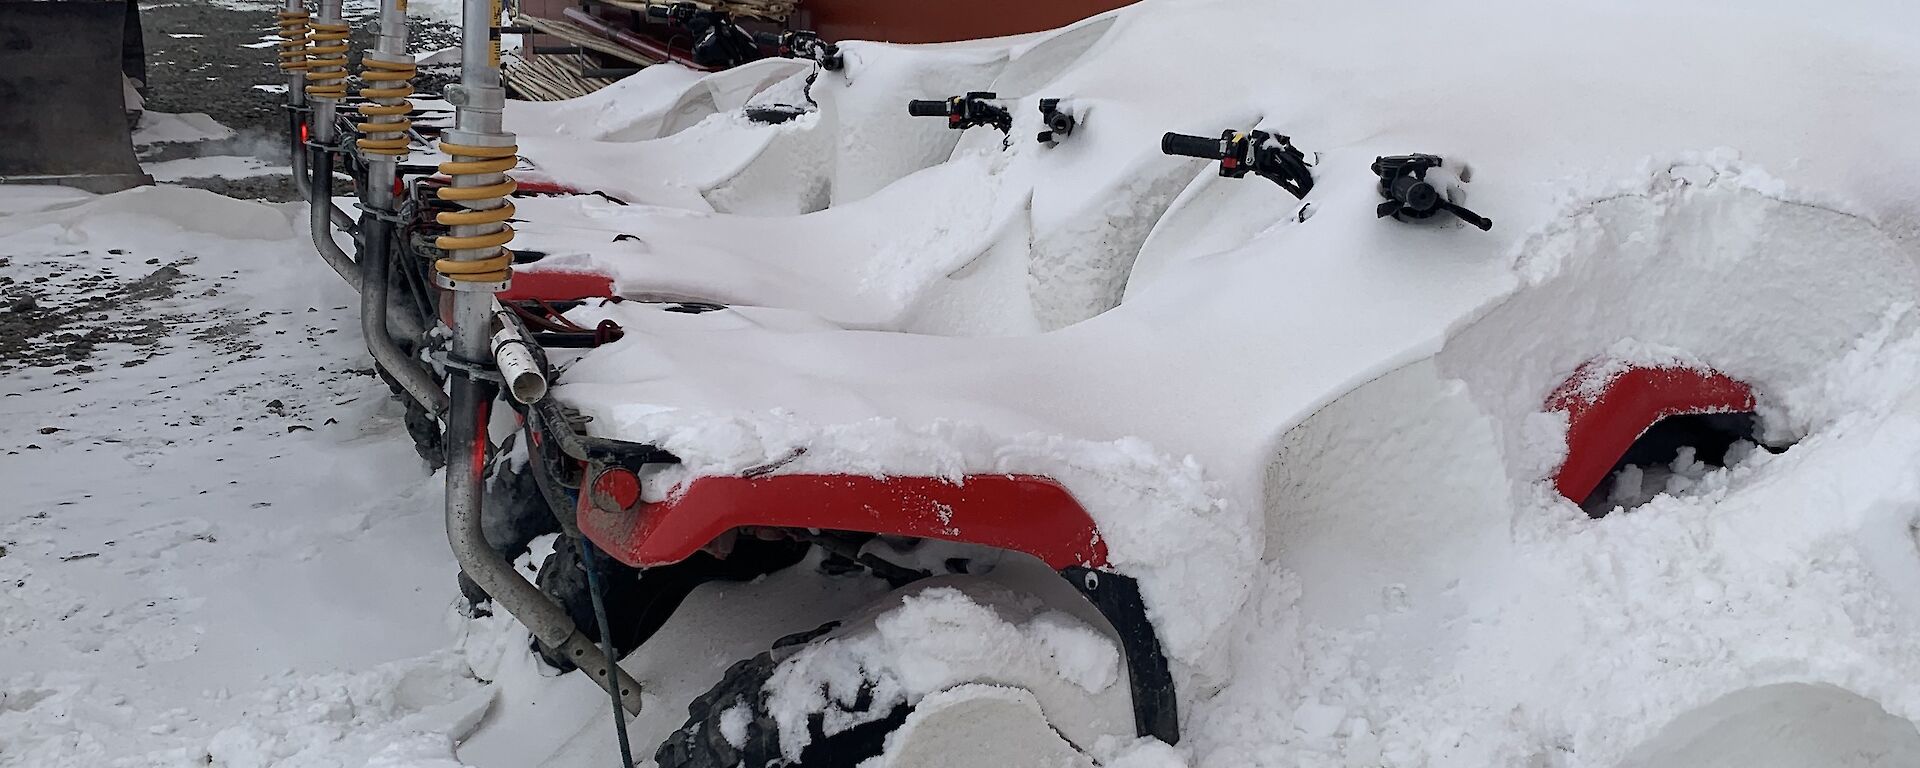 A row of quad bikes covered in snow